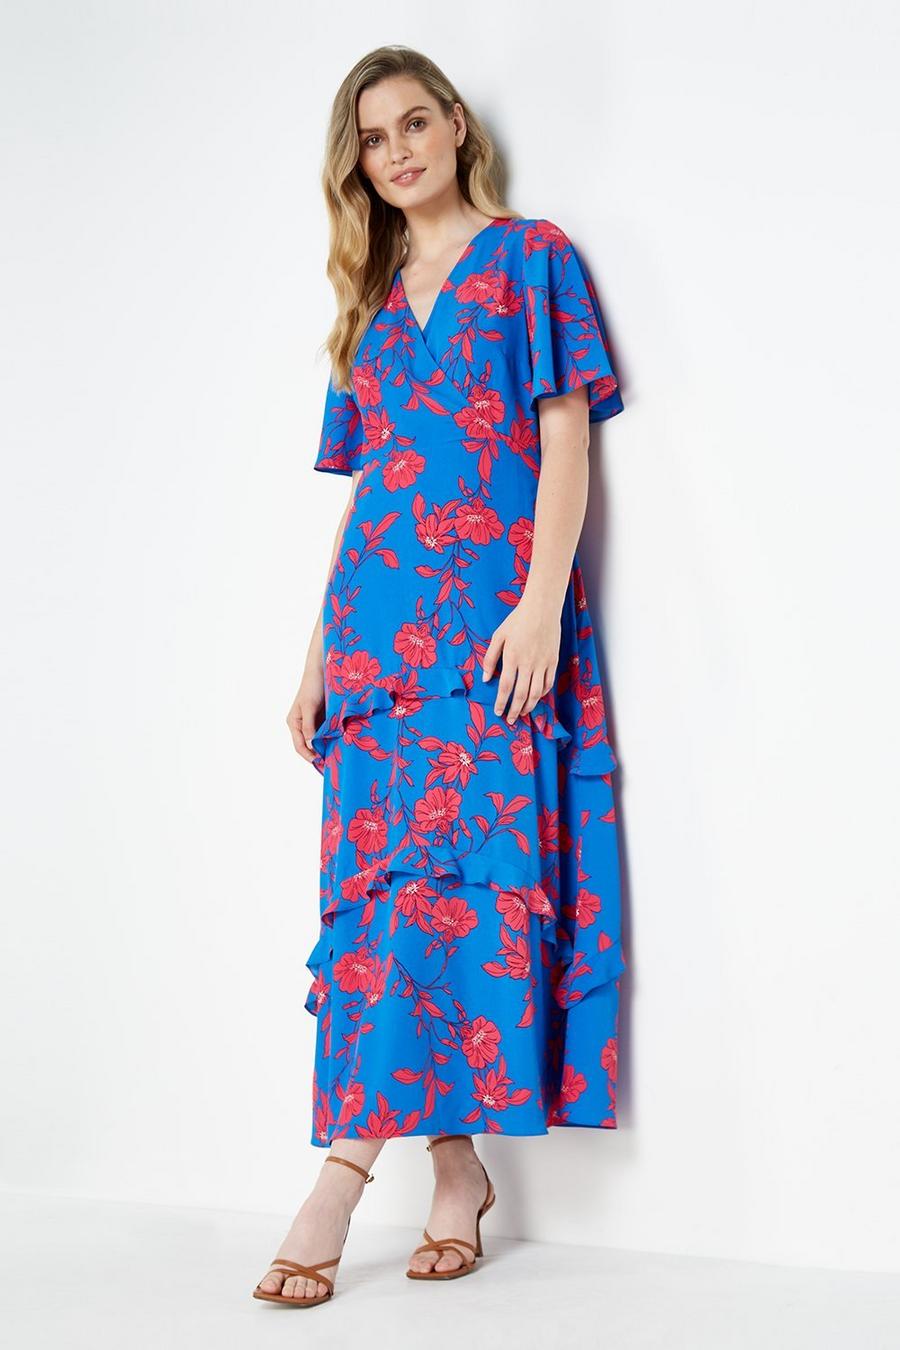 Petite Blue Pink Floral Tiered Maxi Dress